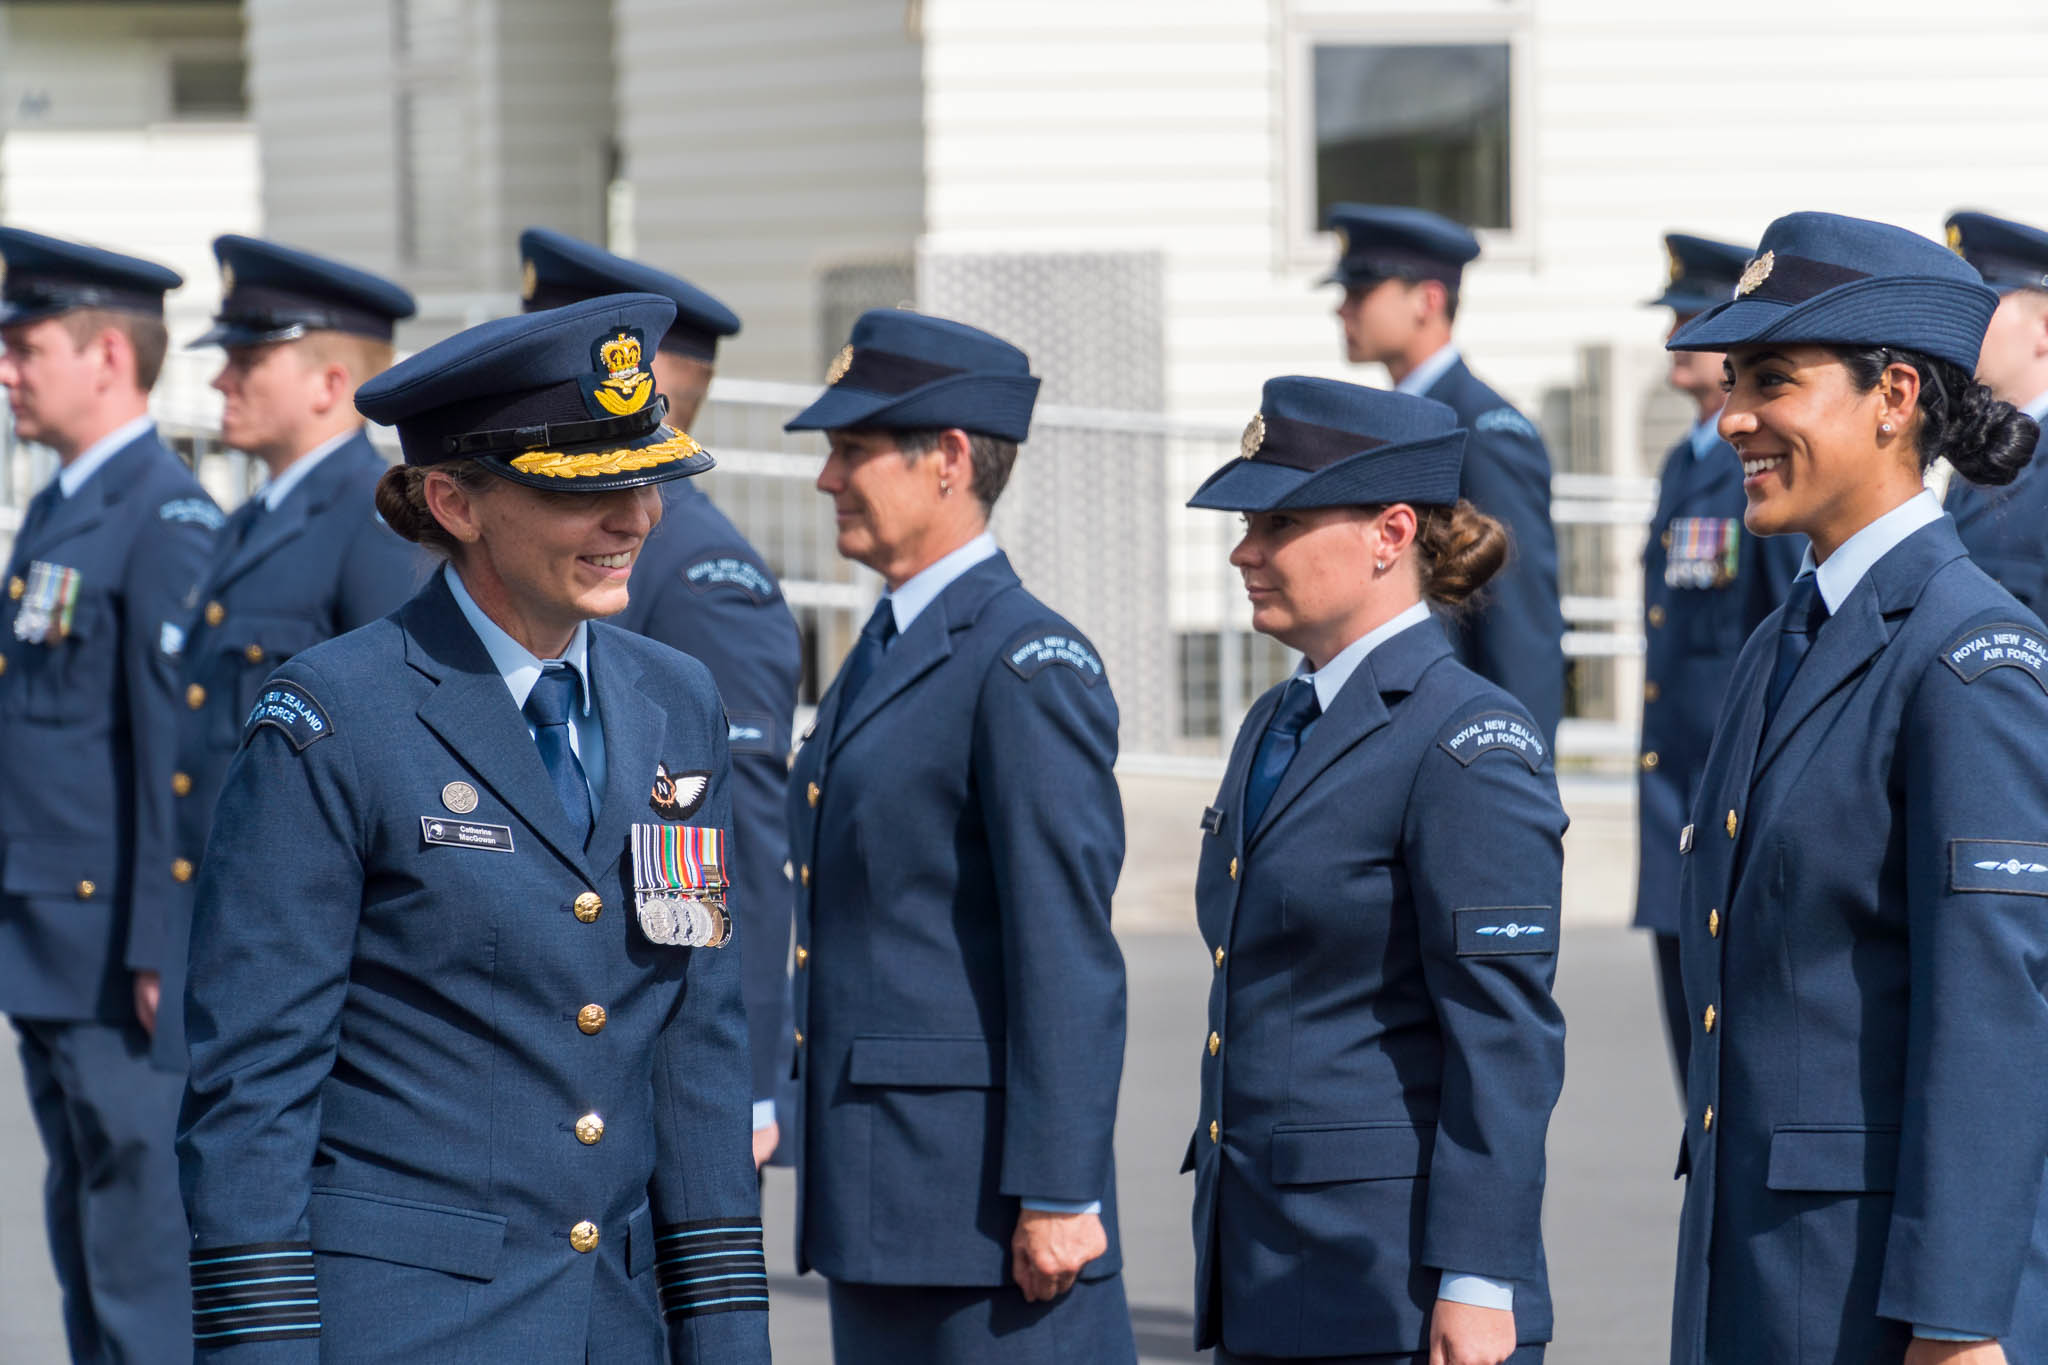 Group Captain Catherine MacGowan and members of the Royal New Zealand Air Force during parade.